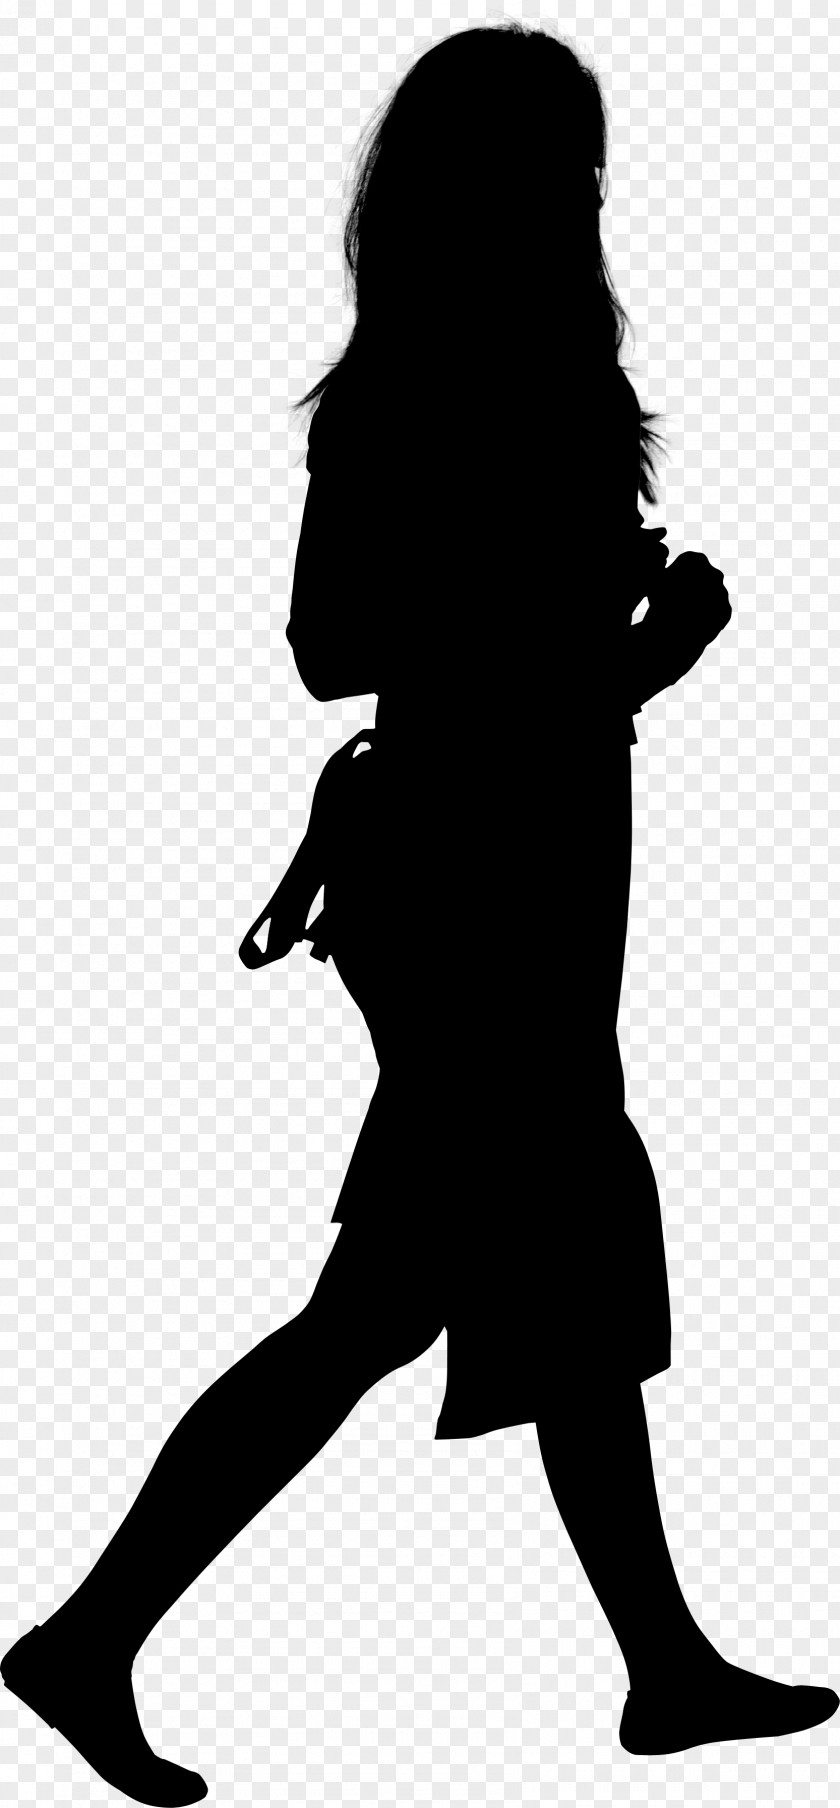 Clip Art Human Silhouette Image PNG